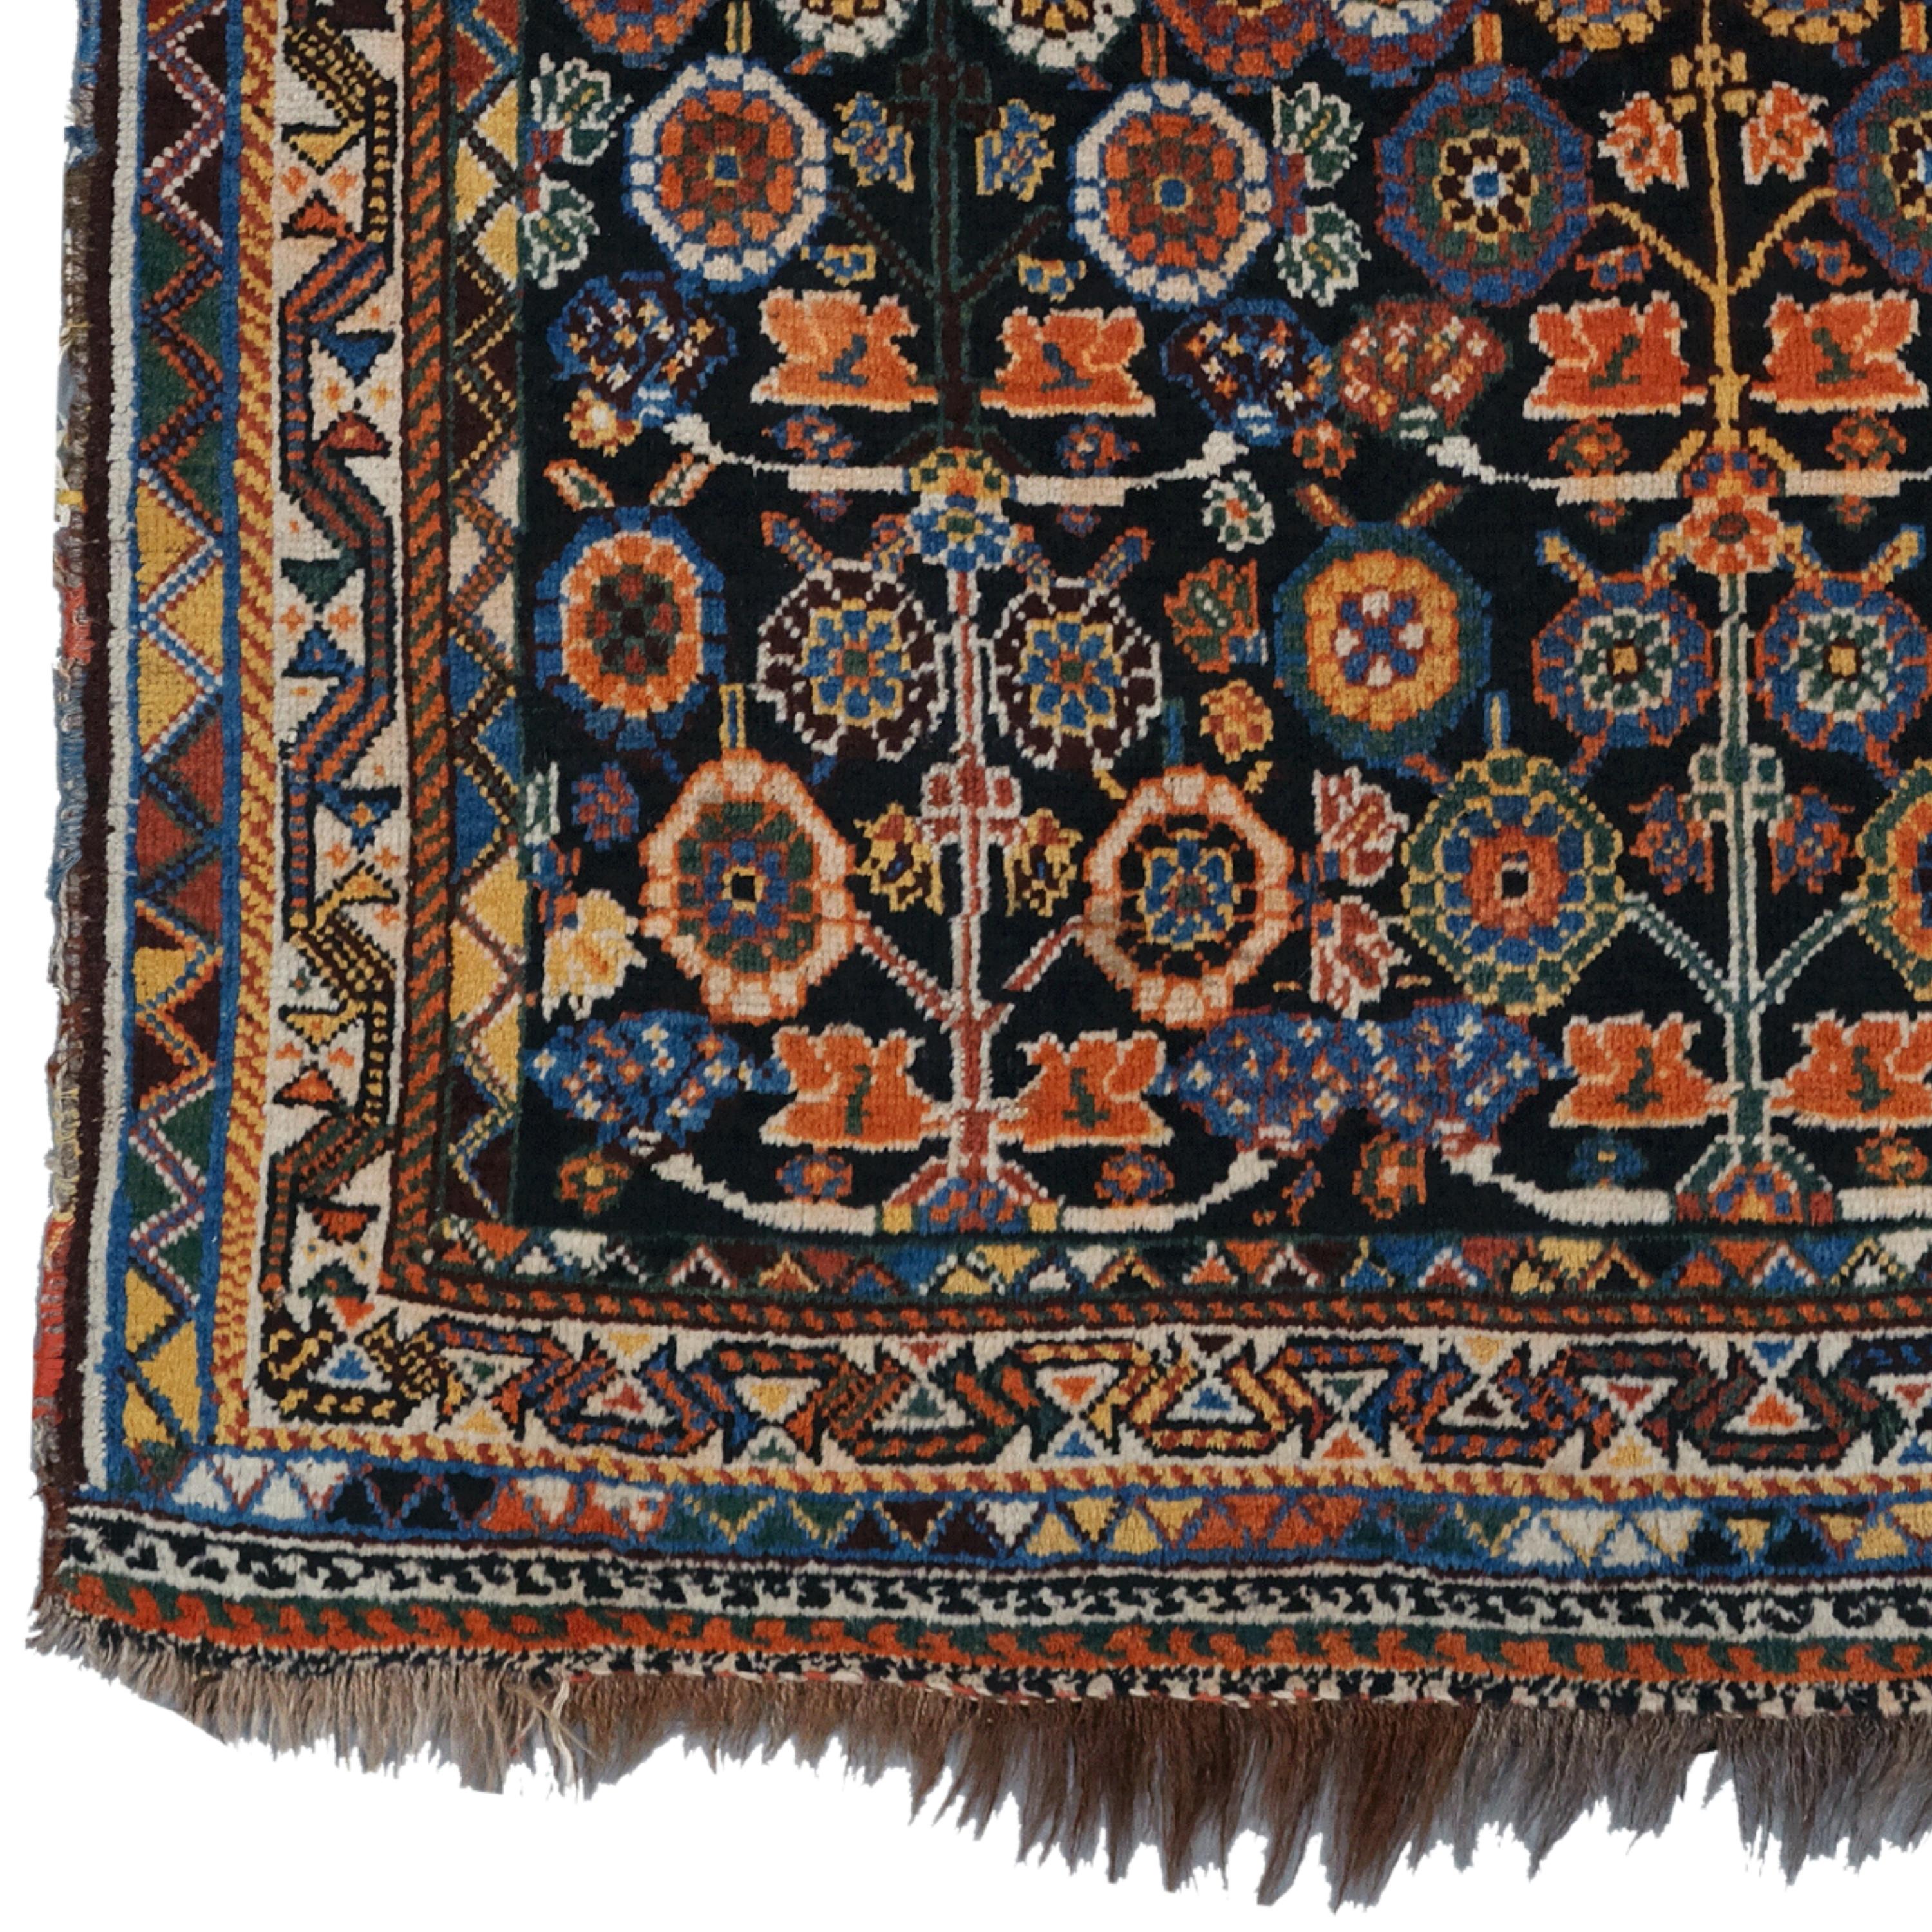 Antique Khamseh Rug
19th Century Khamseh Rug
Size: 102x152 cm  3,34x4,98 Ft

This 19th-century Khamseh carpet is one of the most outstanding examples of its period. This dazzling work, with its rich color palette and detailed patterns, is unique in